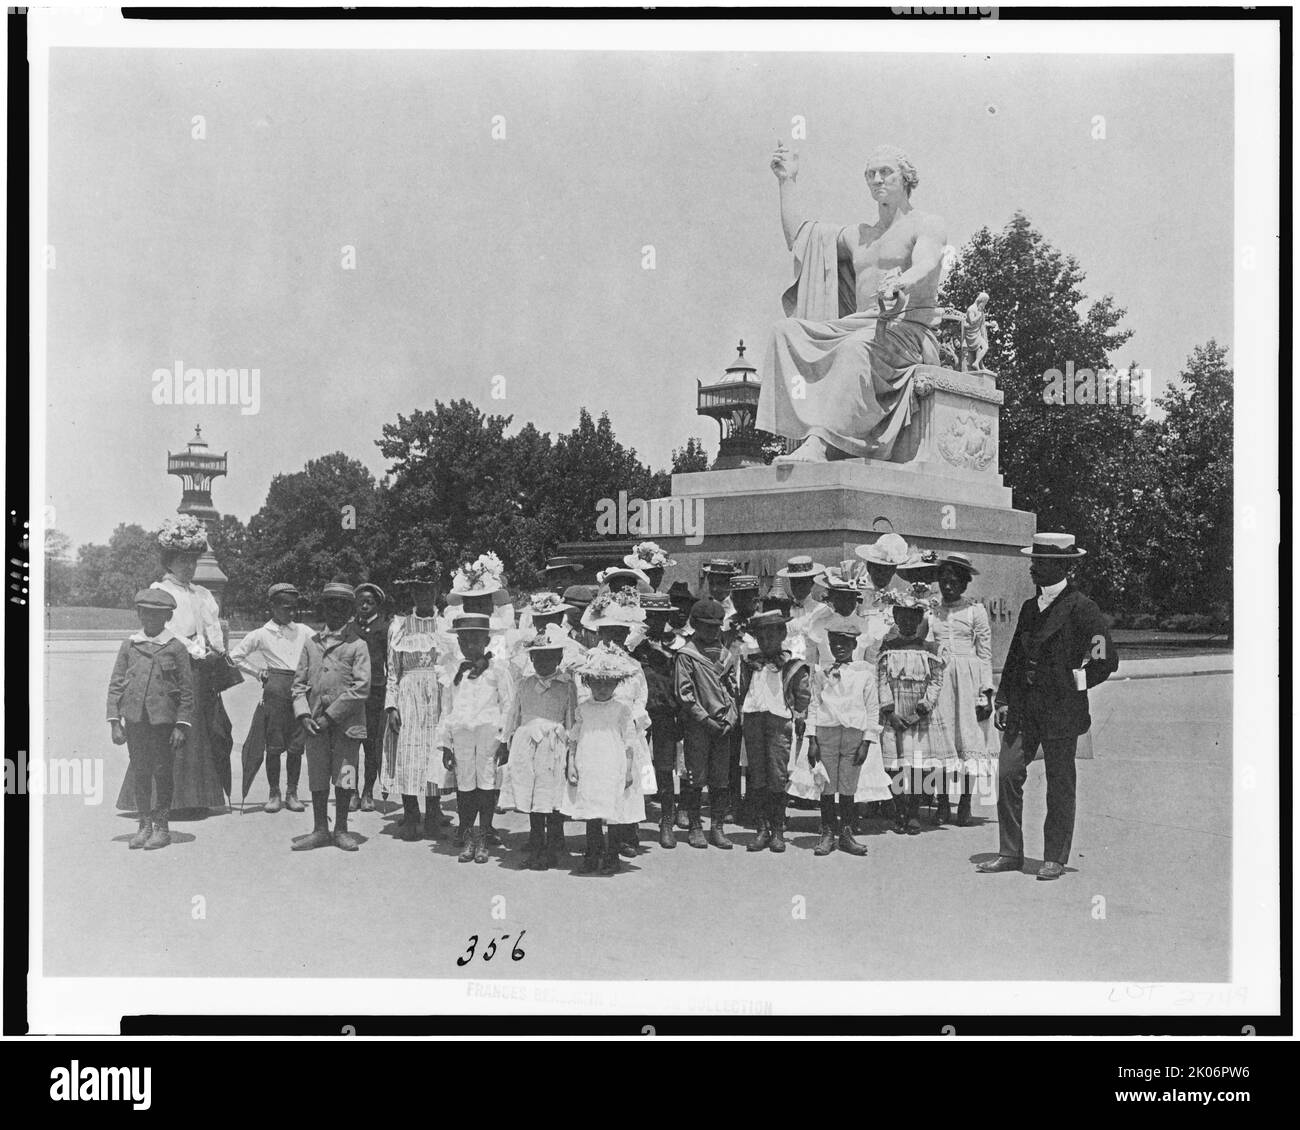 Group of school children in front of statue of George Washington, Washington, D.C., (1899?). [African American children on a school trip, with the 'Enthroned Washington' sculpture by Horatio Greenough behind. George Washington is depicted as a Roman emperor in a toga]. Stock Photo